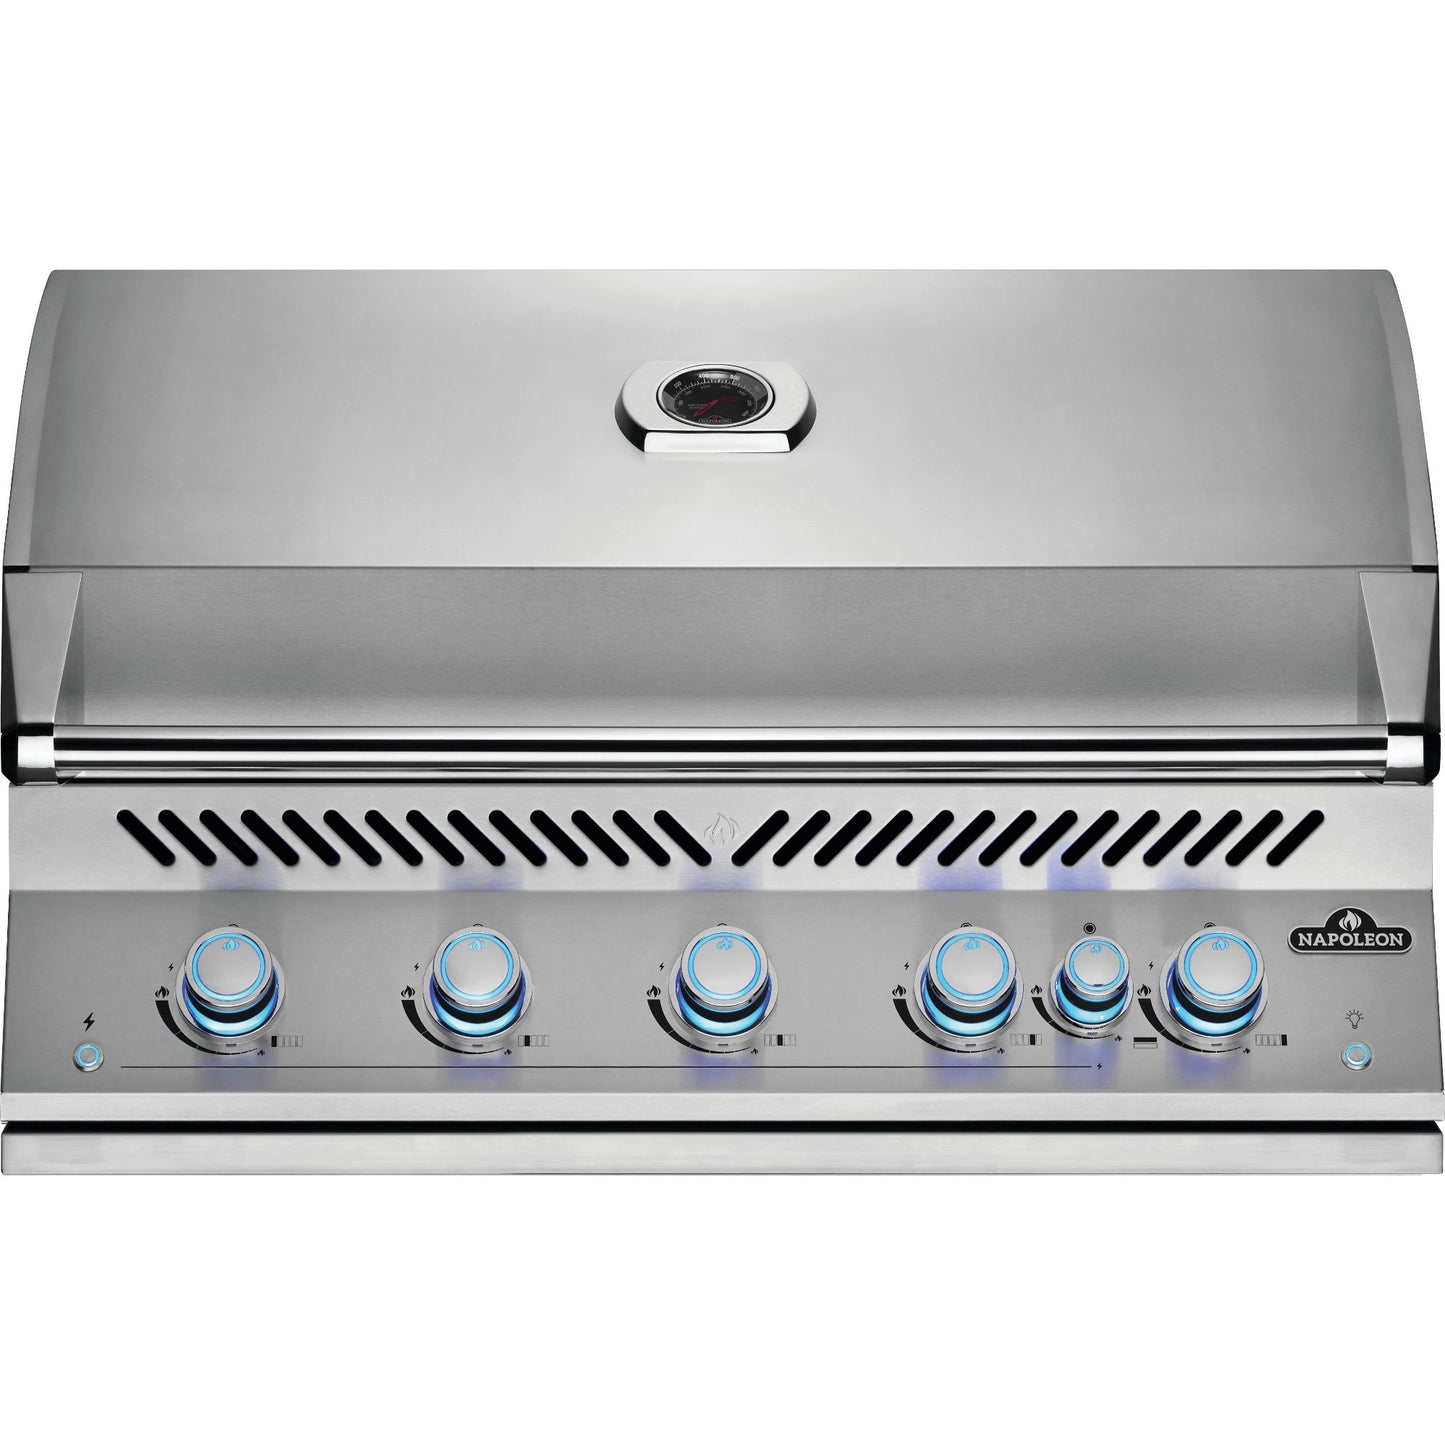 Napoleon 700 Series 38" Built-In BBQ with Infrared Rear Burner BIG38RB